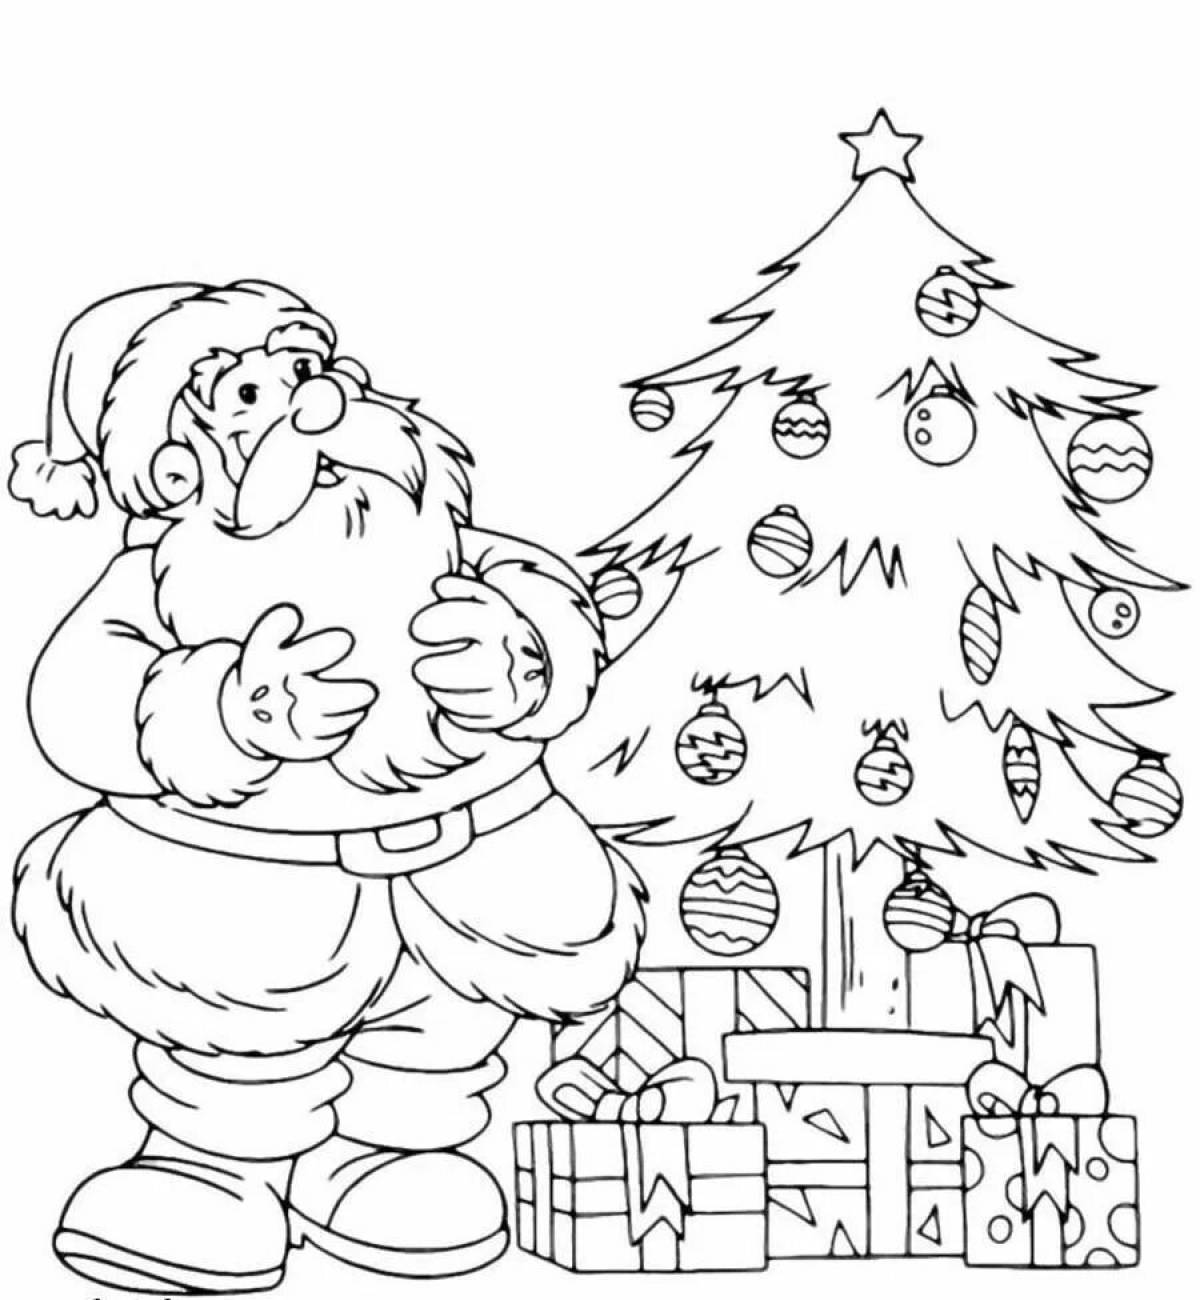 Santa Claus and Christmas tree for children #7